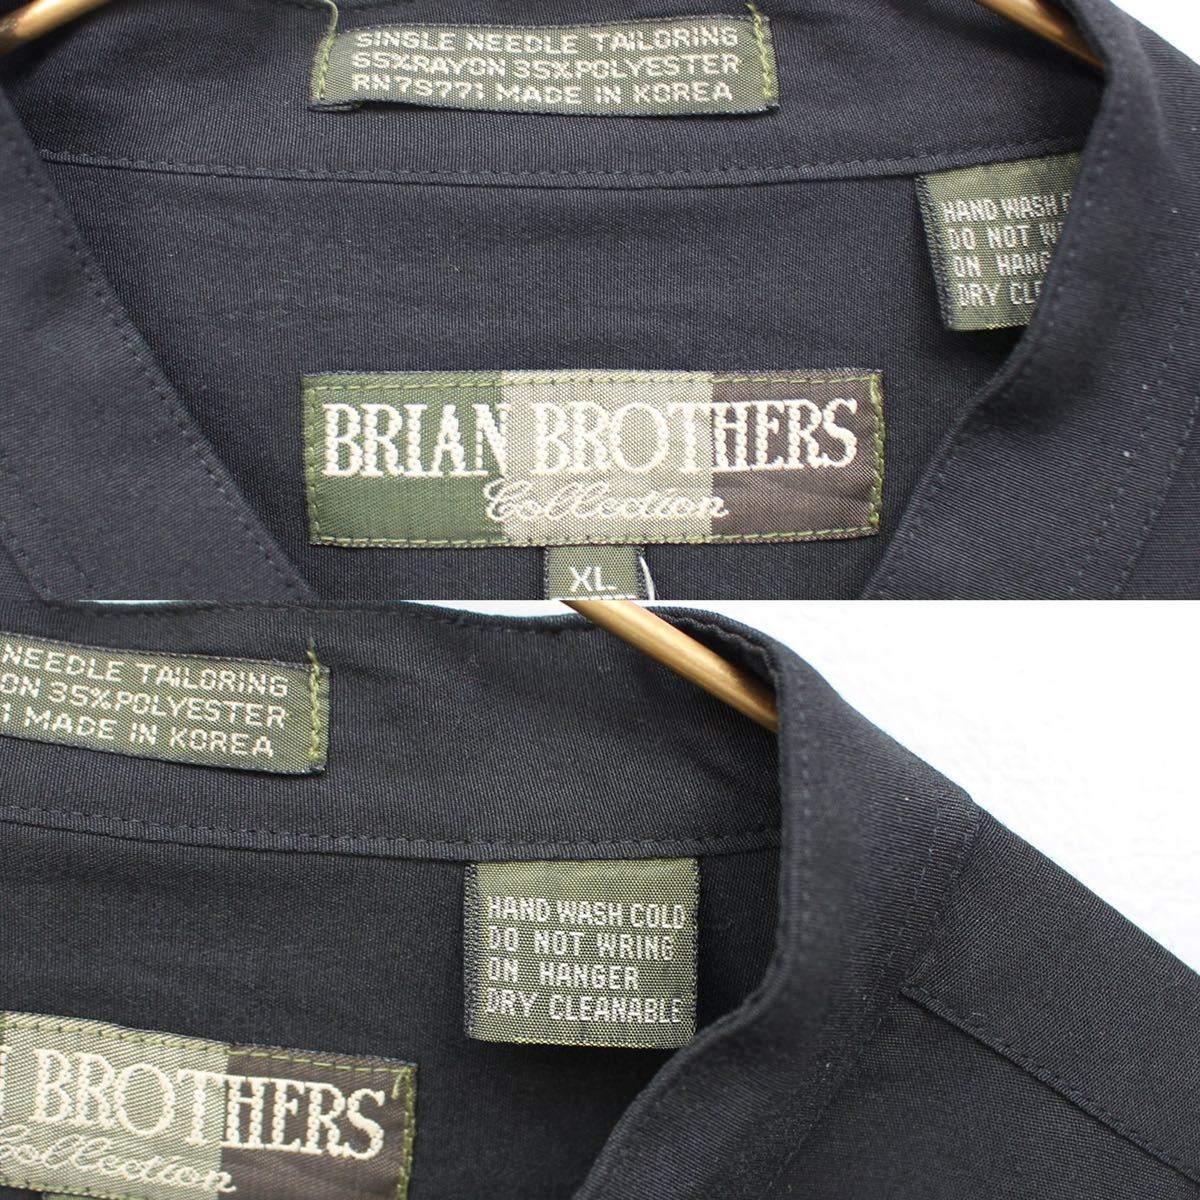 USA VINTAGE BRIAN BRO THERS EMBROIDERY JACQUARD DESIGN SHIRT/アメリカ古着刺繍ジャガードデザインシャツ